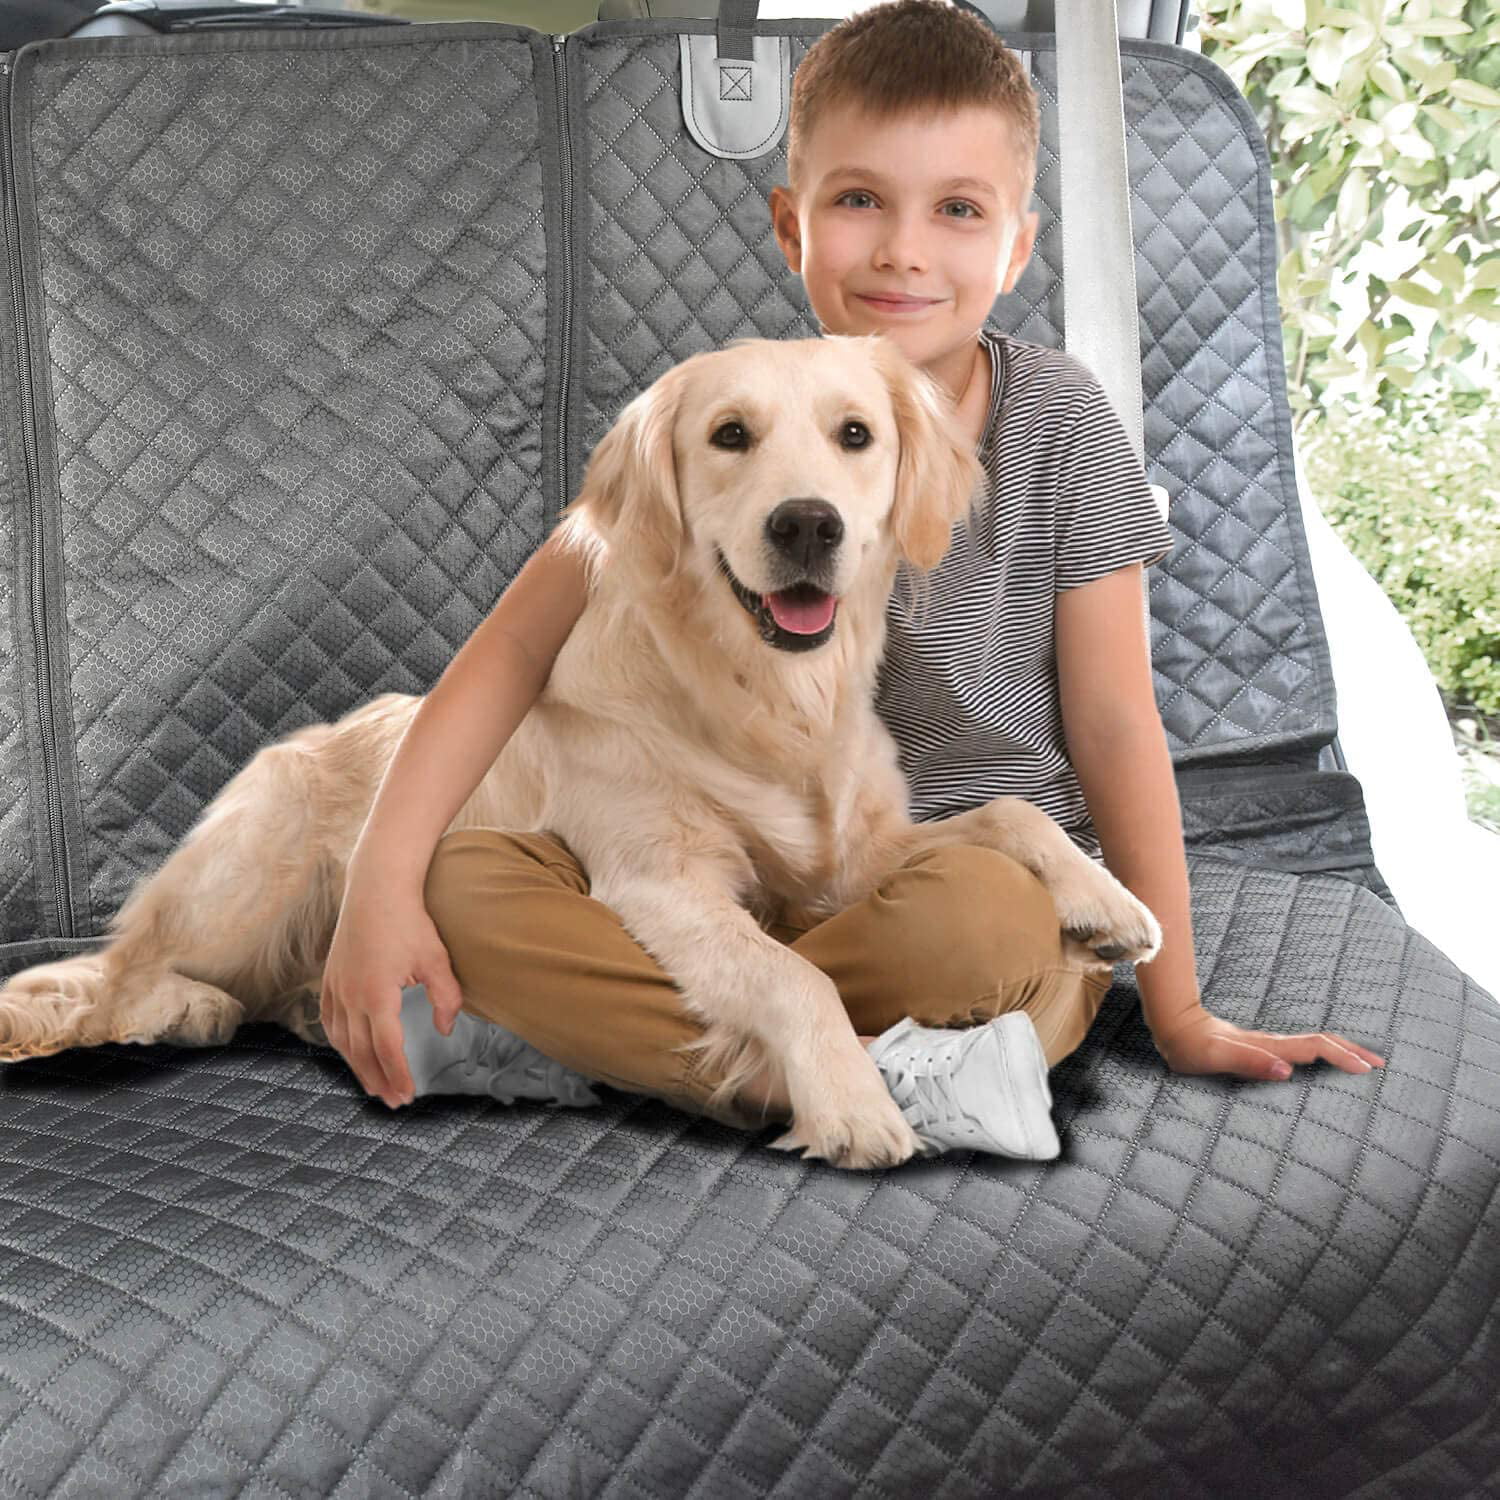 Heavy-Duty & Nonslip Back Seat Cover for Dogs,Washable & Compatible Pet Car Seat Cover for Cars 100% Waterproof Dog Car Seat Covers Vailge Bench Dog Seat Cover for Back Seat Trucks & SUVs